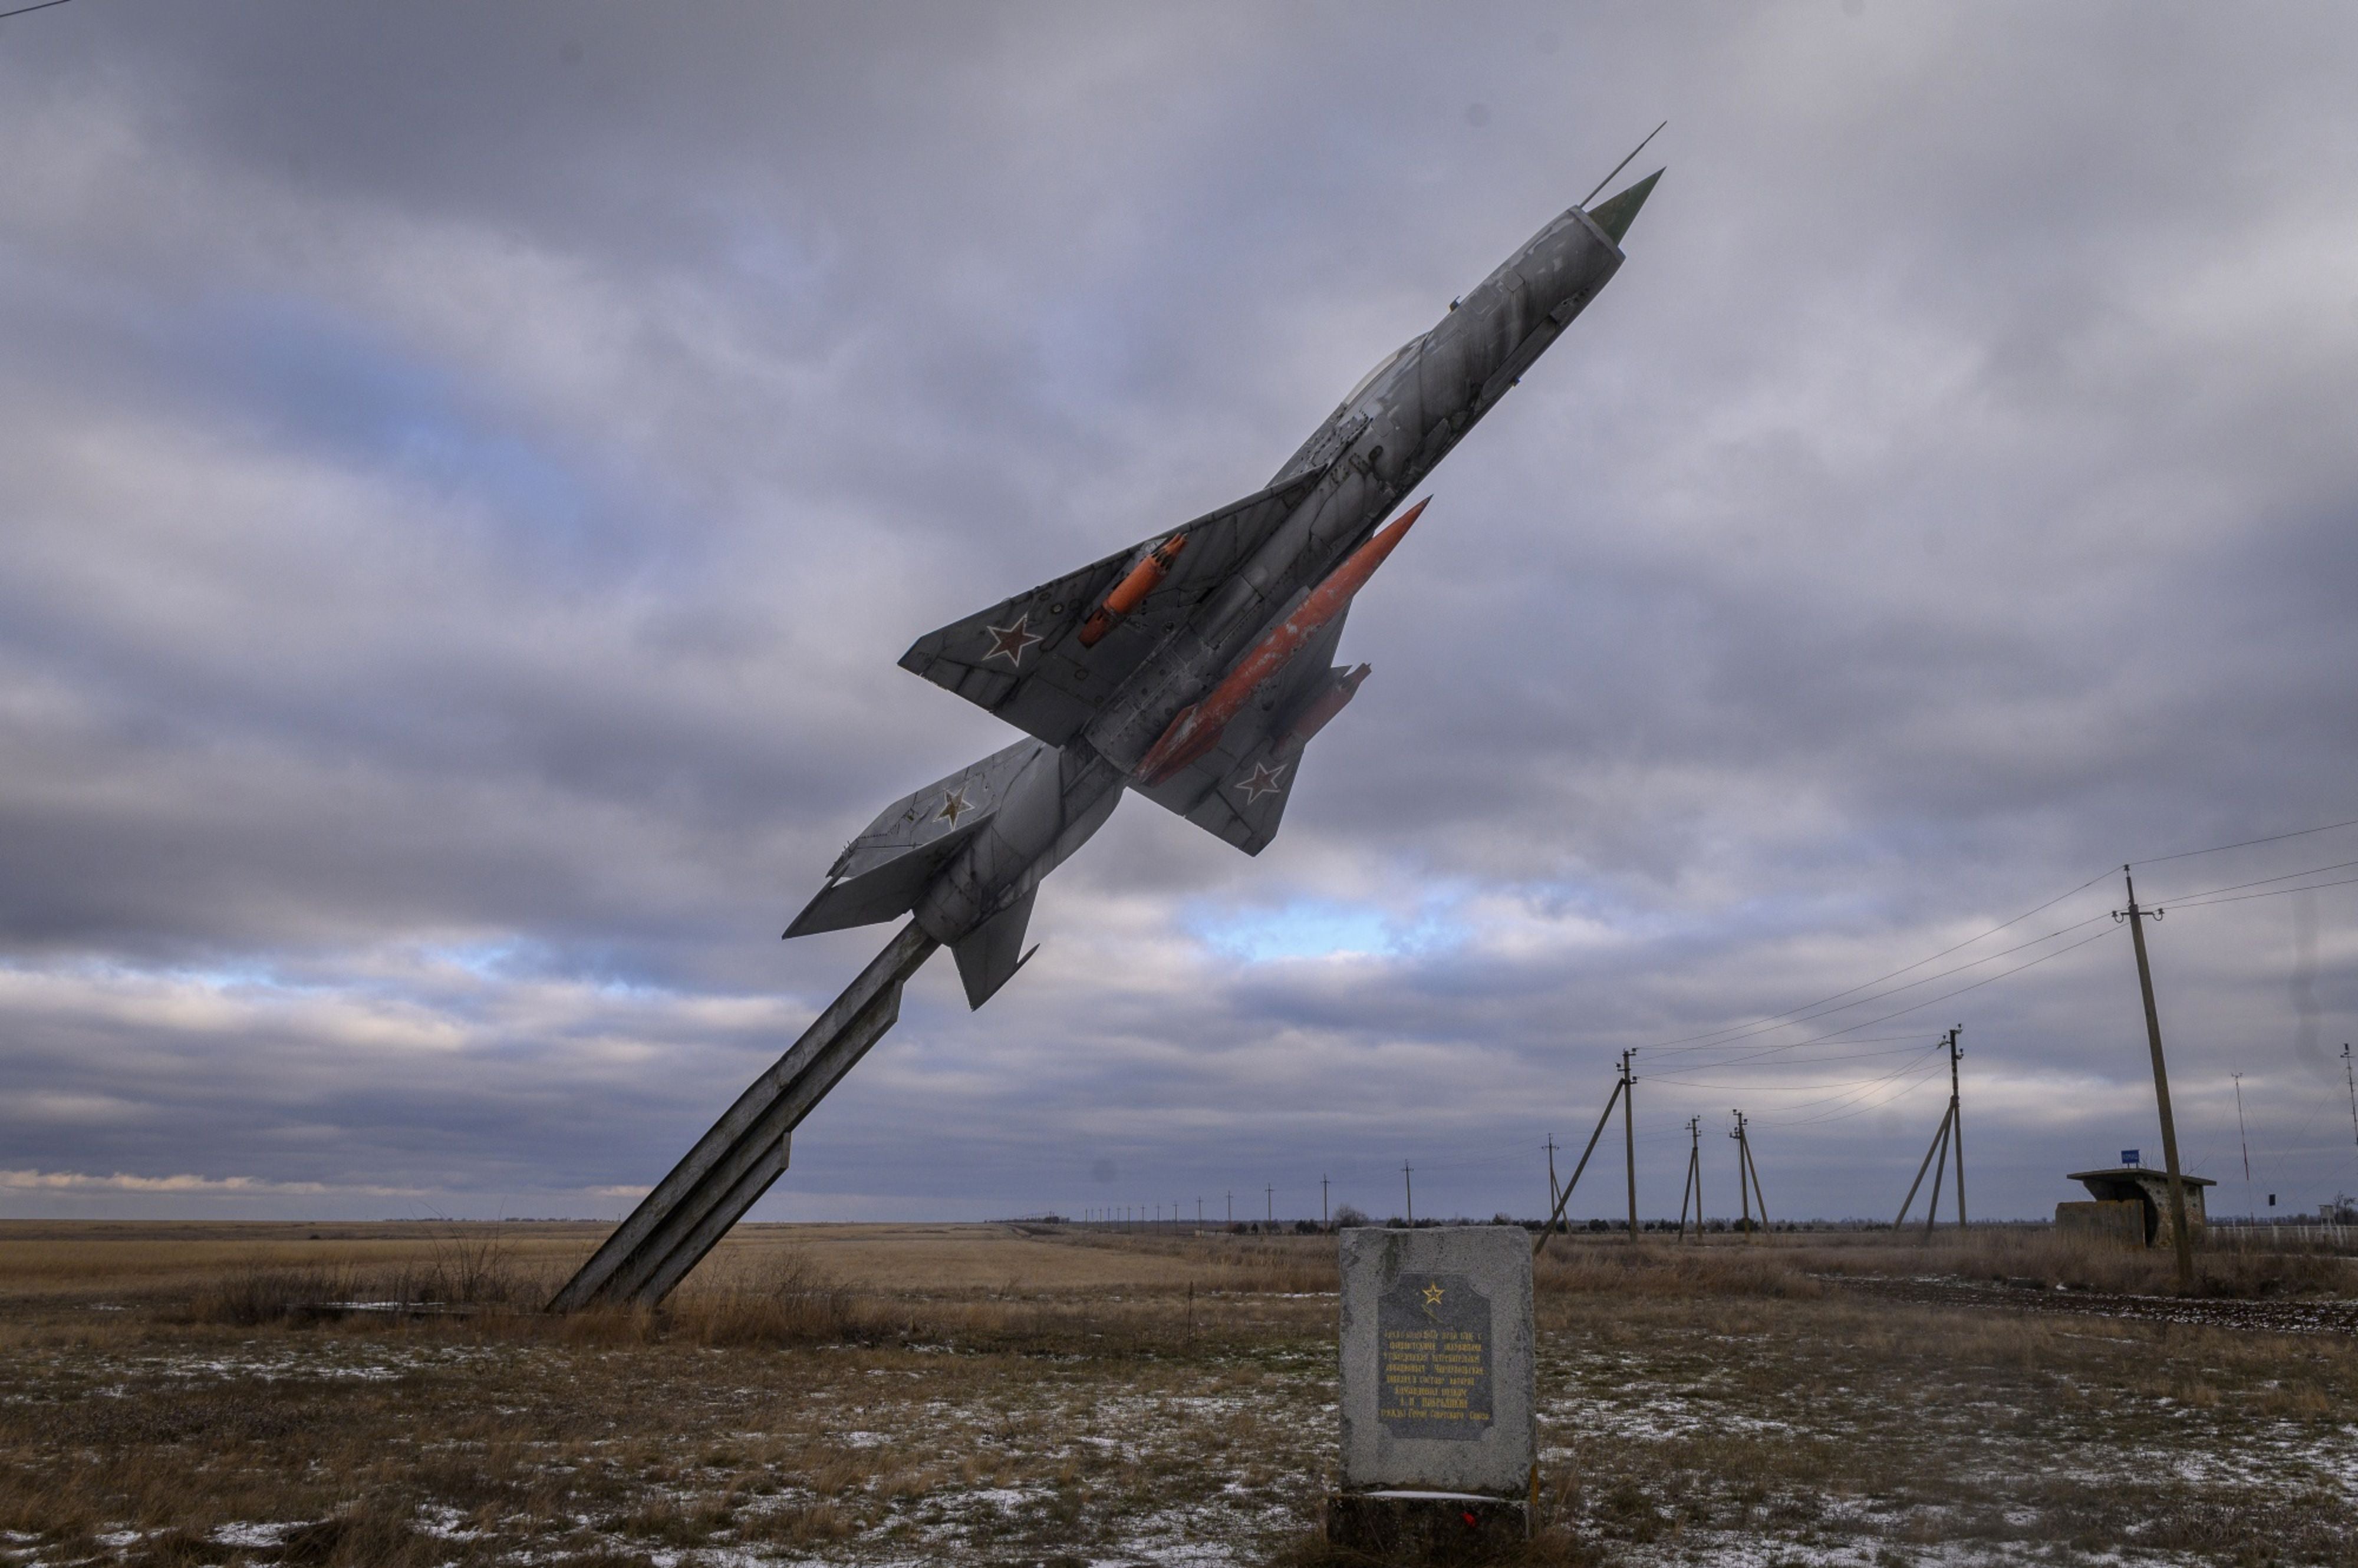 A Second World War memorial to Soviet forces on the side of a deserted road to Crimea in Kherson oblast, Ukraine